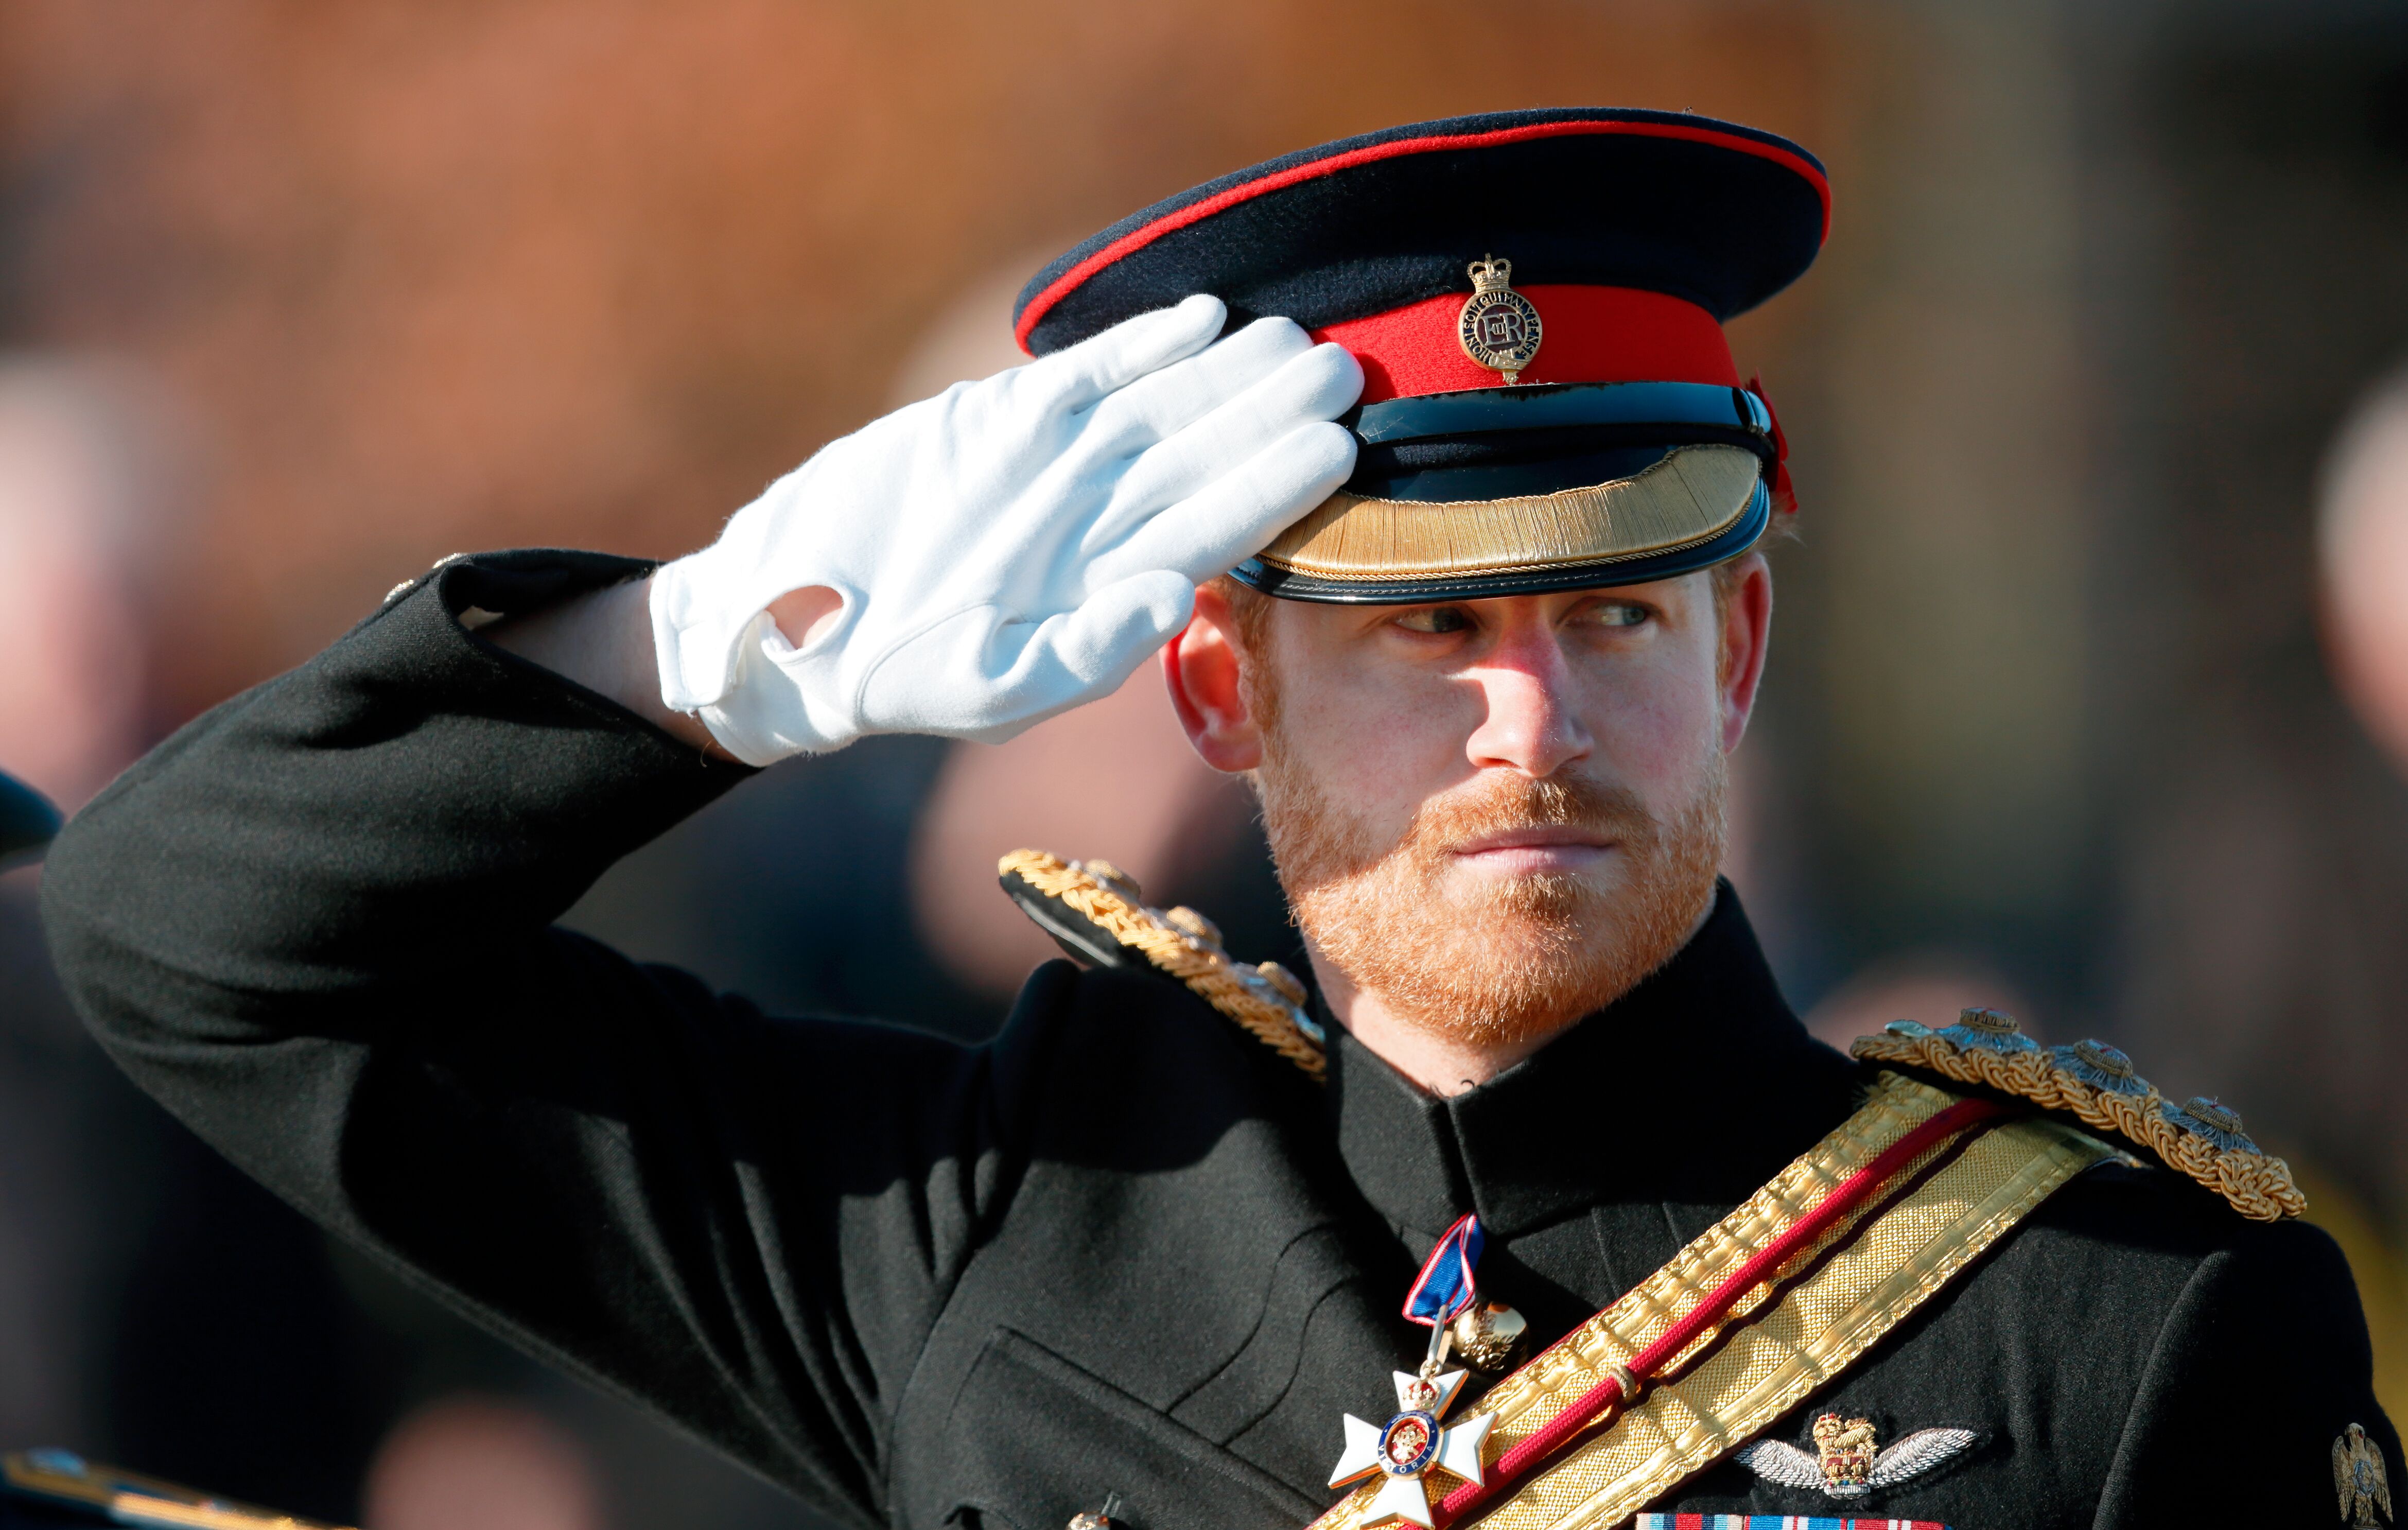 Prince Harry attends the Armistice Day Service at the National Memorial Arboretum on November 11, 2016 in Alrewas, England | Photo: Getty Images